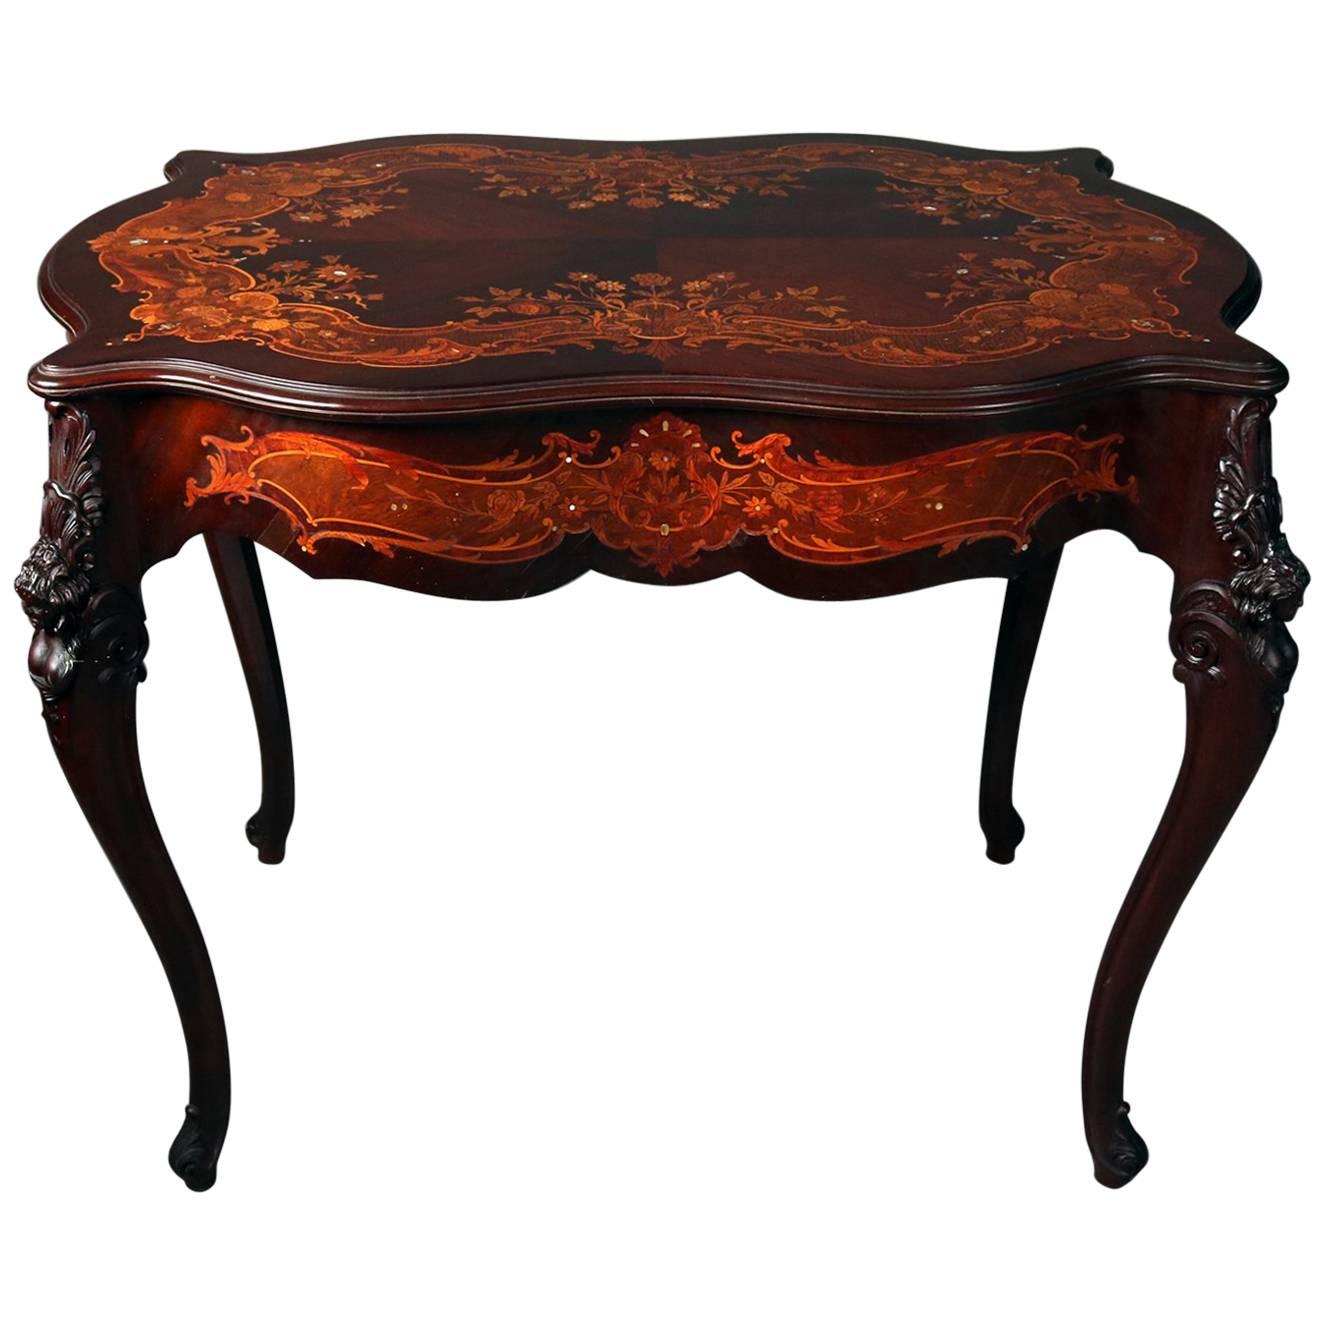 Antique French Louis XV Carved Mahogany Marquetry Inlaid Center Table